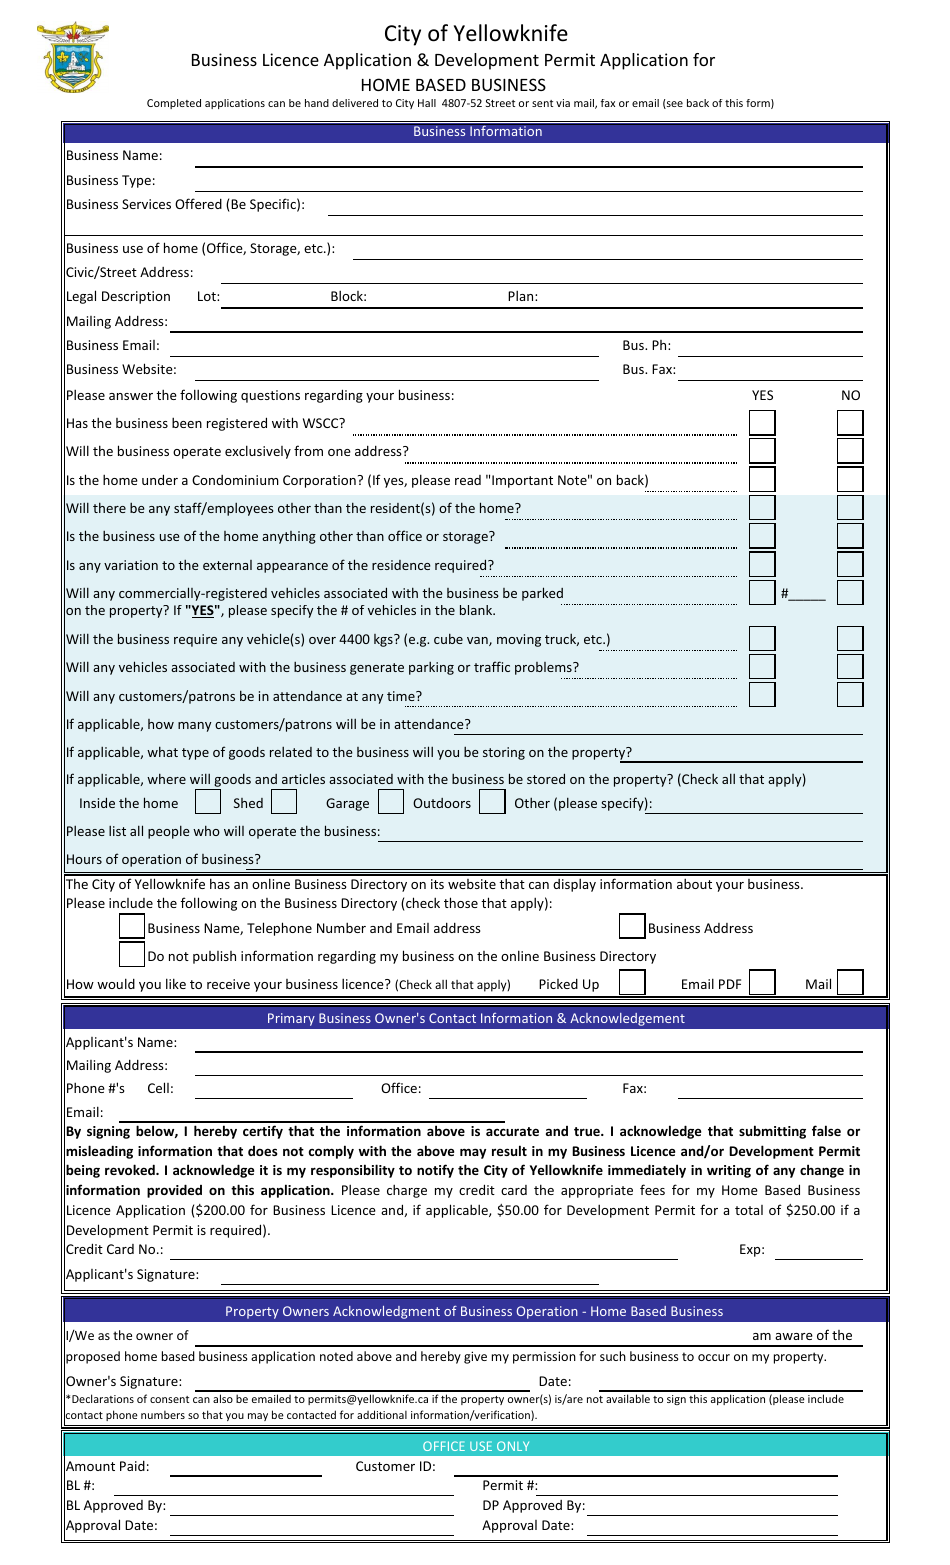 Form DM299787 Business Licence Application  Development Permit Application for Home Based Business - City of Yellowknife, Northwest Territories, Canada, Page 1